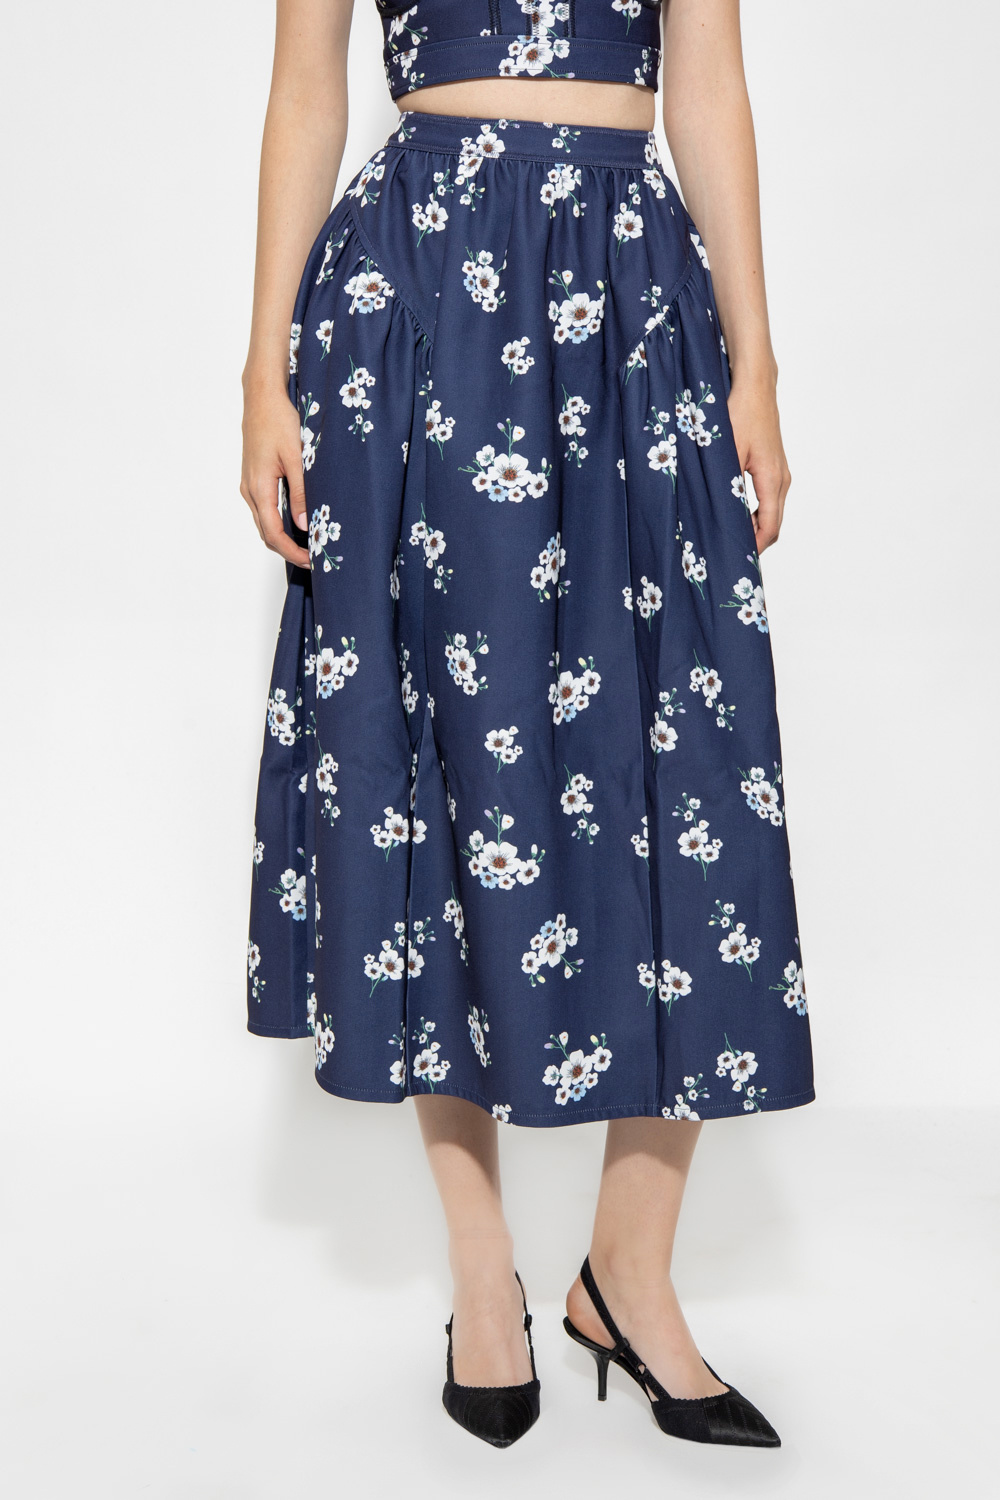 Self Portrait Skirt with floral motif